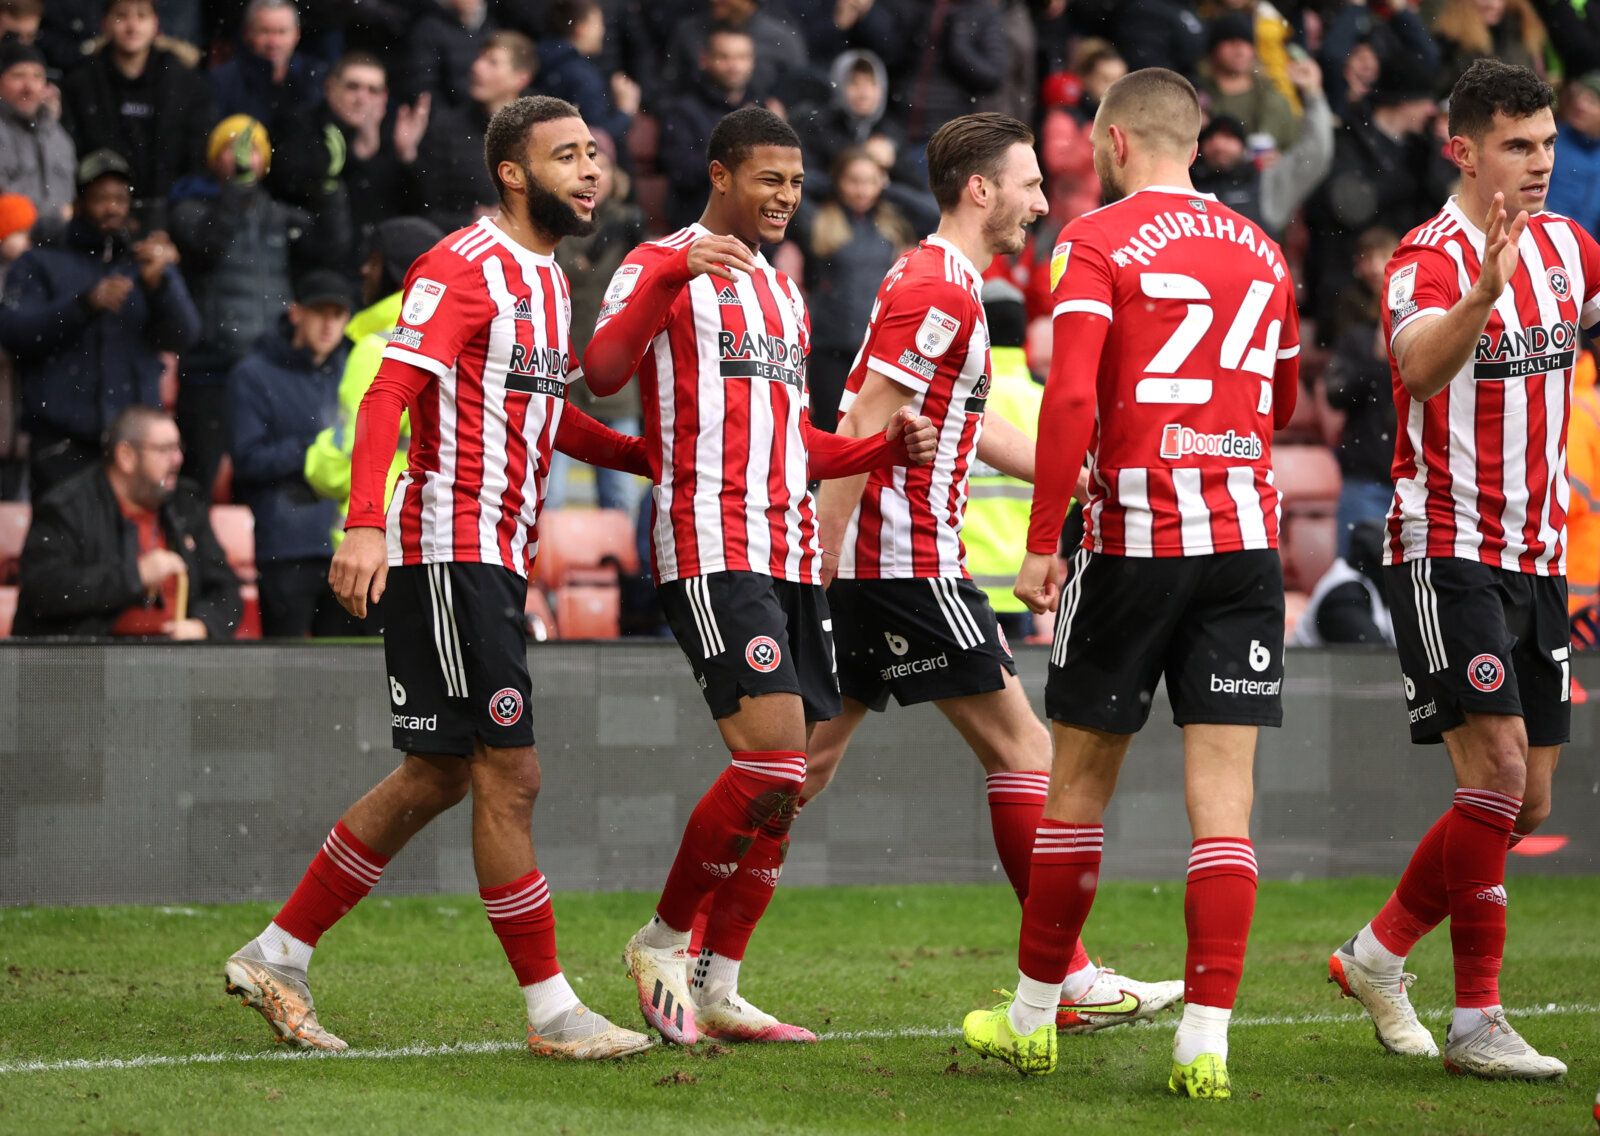 Soccer Football - Championship - Sheffield United v Bristol City - Bramall Lane, Sheffield, Britain - November 28, 2021 Sheffield United's Rhian Brewster celebrates scoring their first goal with teammates Action Images/Molly Darlington EDITORIAL USE ONLY. No use with unauthorized audio, video, data, fixture lists, club/league logos or 'live' services. Online in-match use limited to 75 images, no video emulation. No use in betting, games or single club /league/player publications.  Please contact